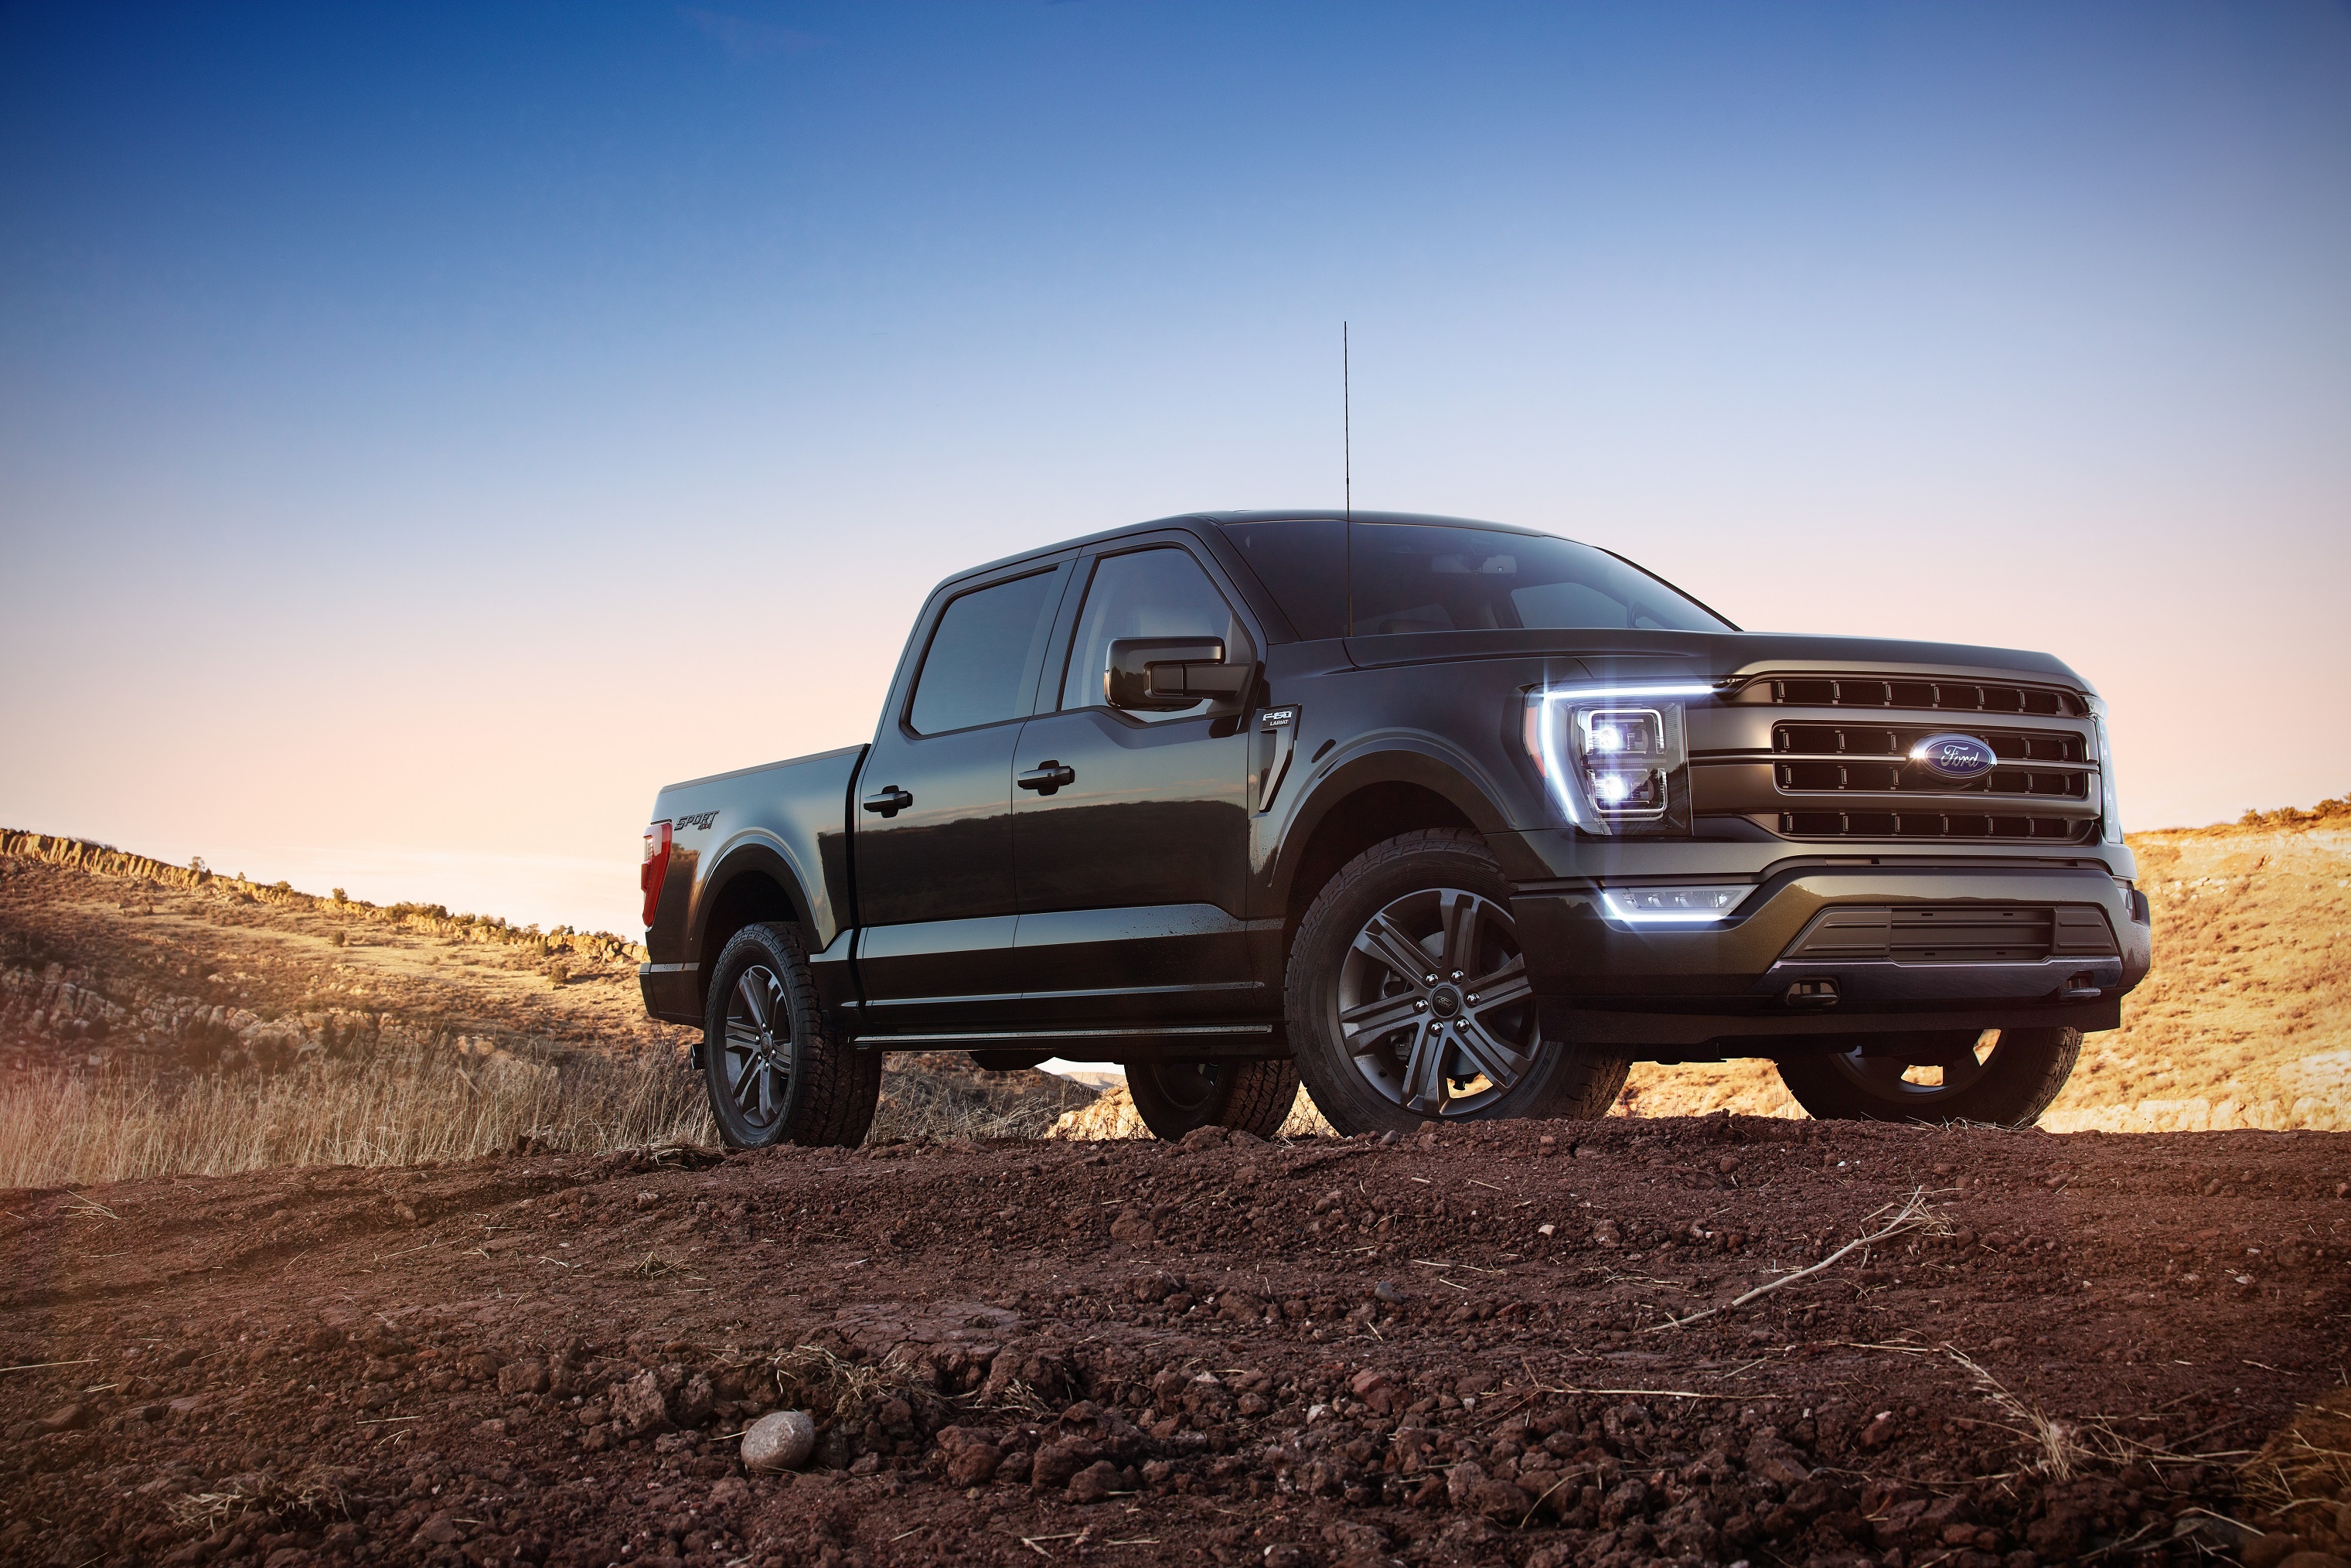 Ford Wins 2021 Green Car and Truck of the Year Awards with All-Electric Mustang Mach-E and All-New F-150